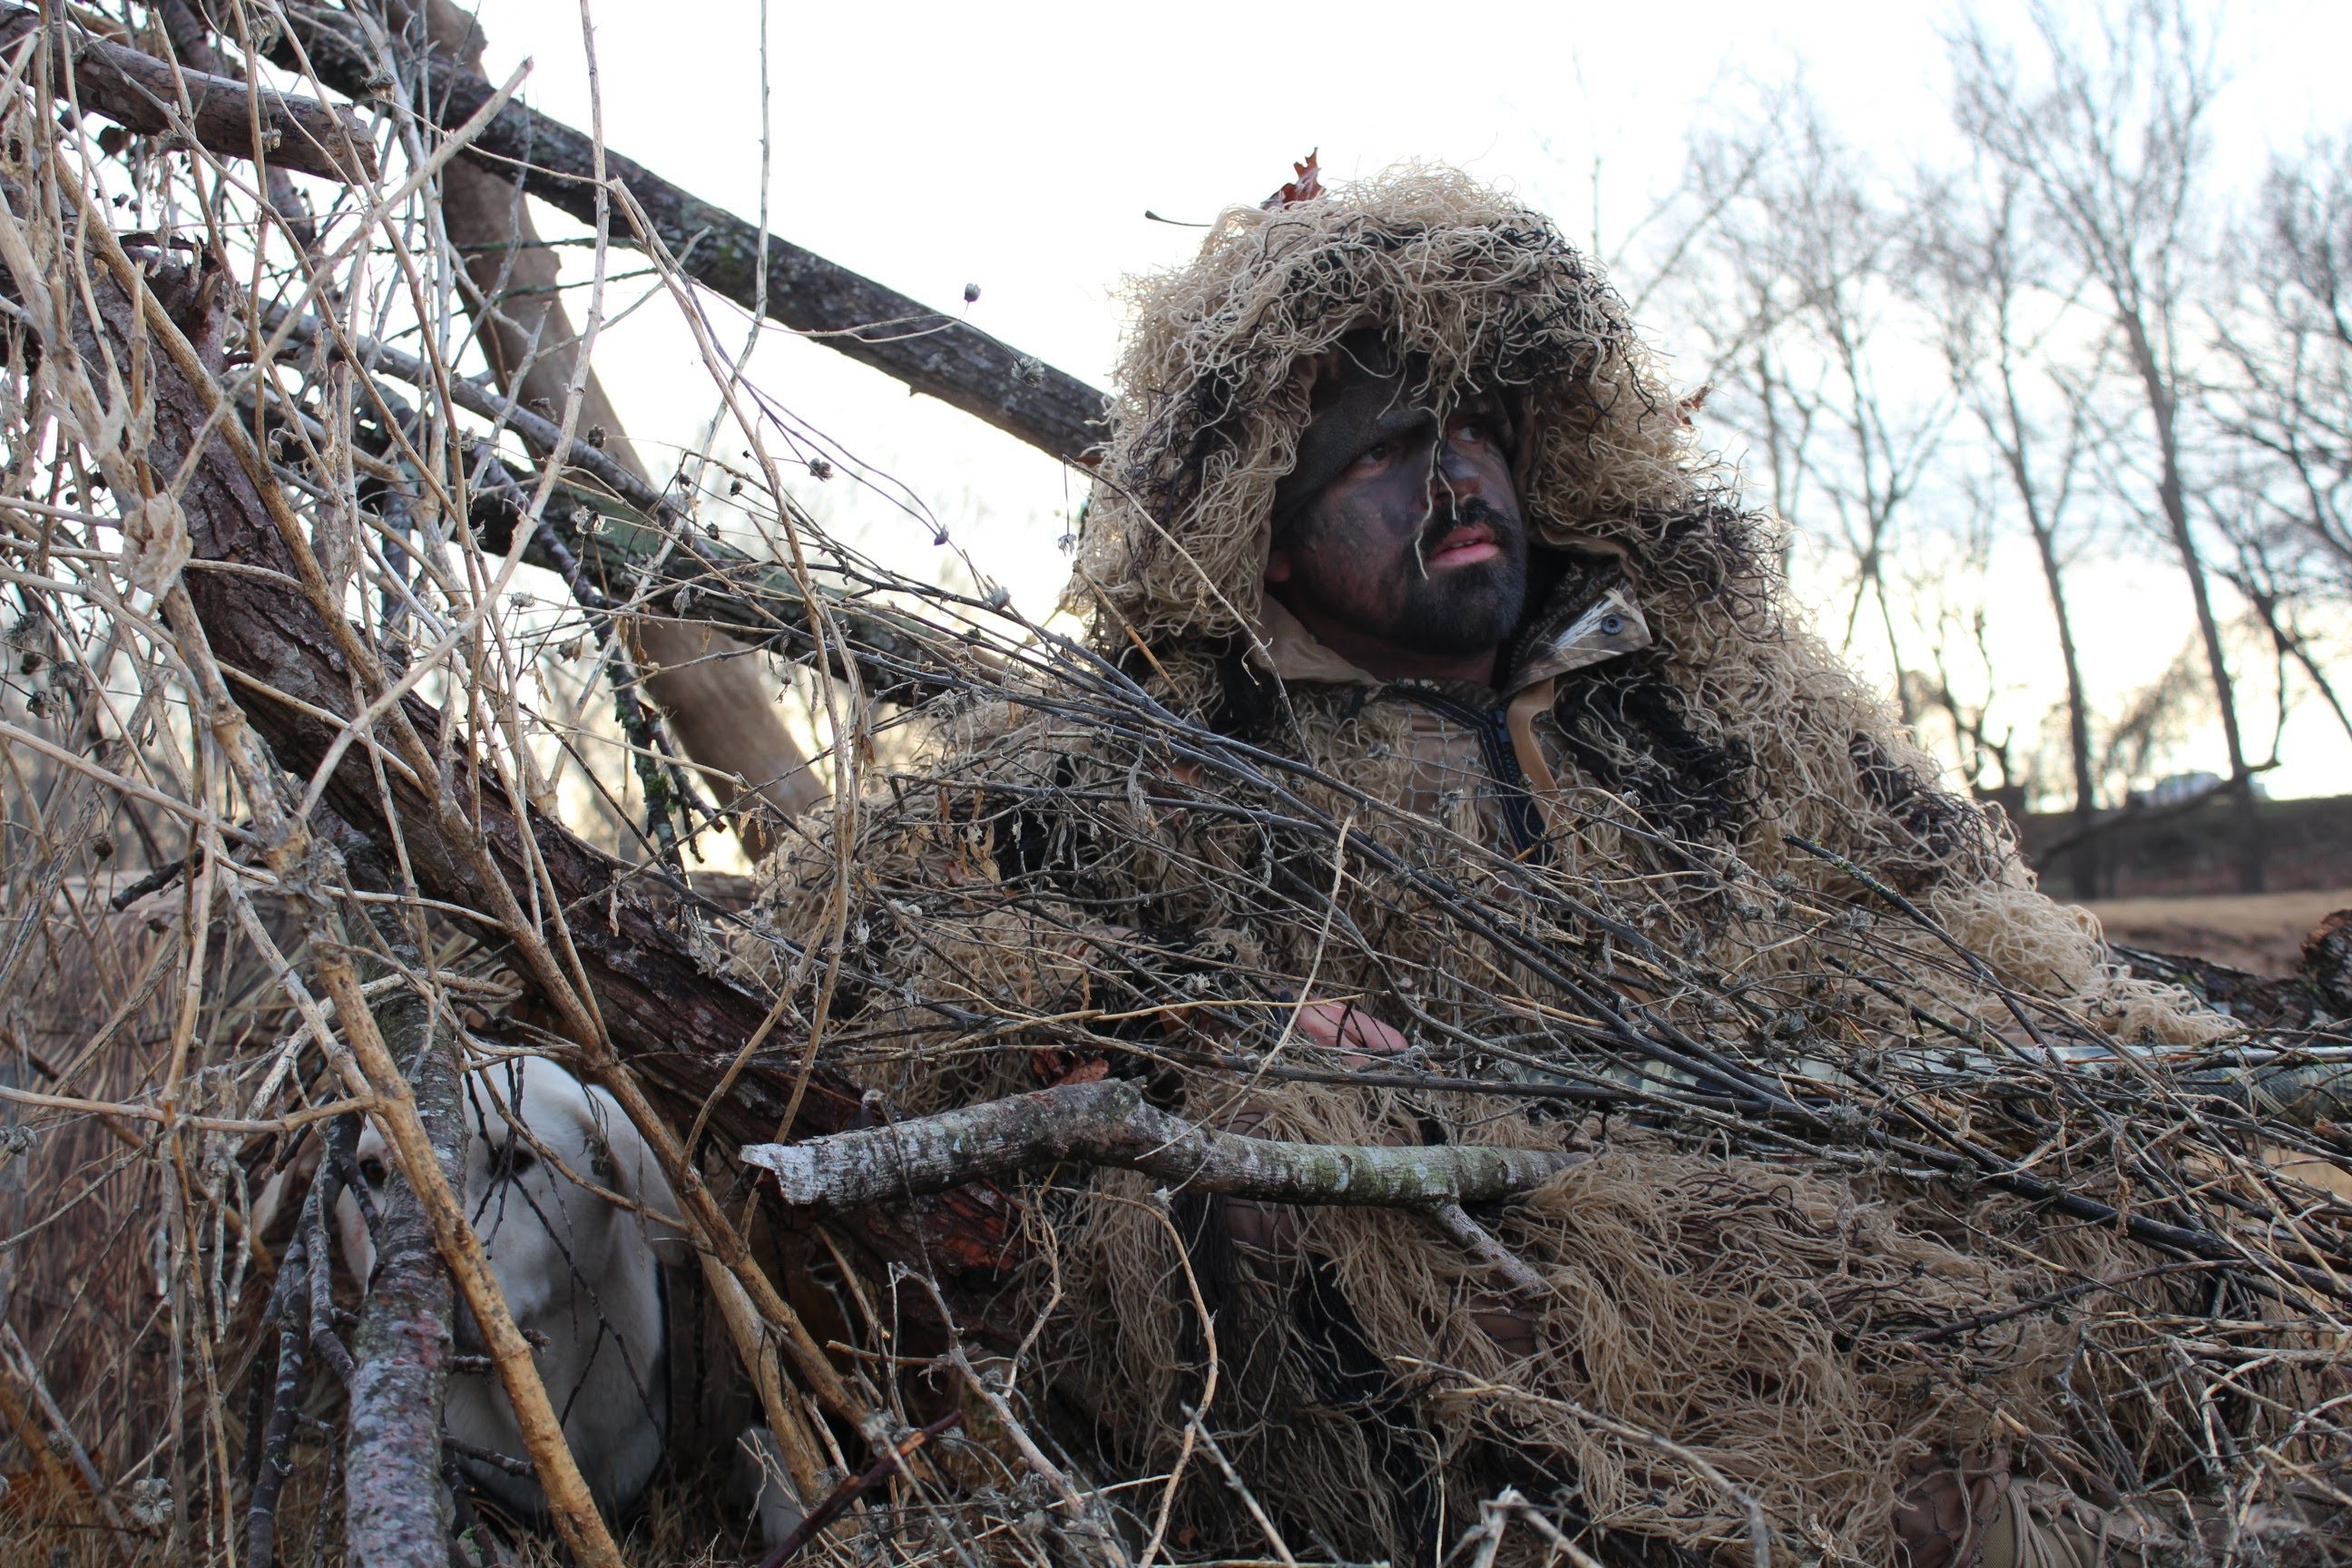 2592x1728 ghillie suit hunter - Google Search